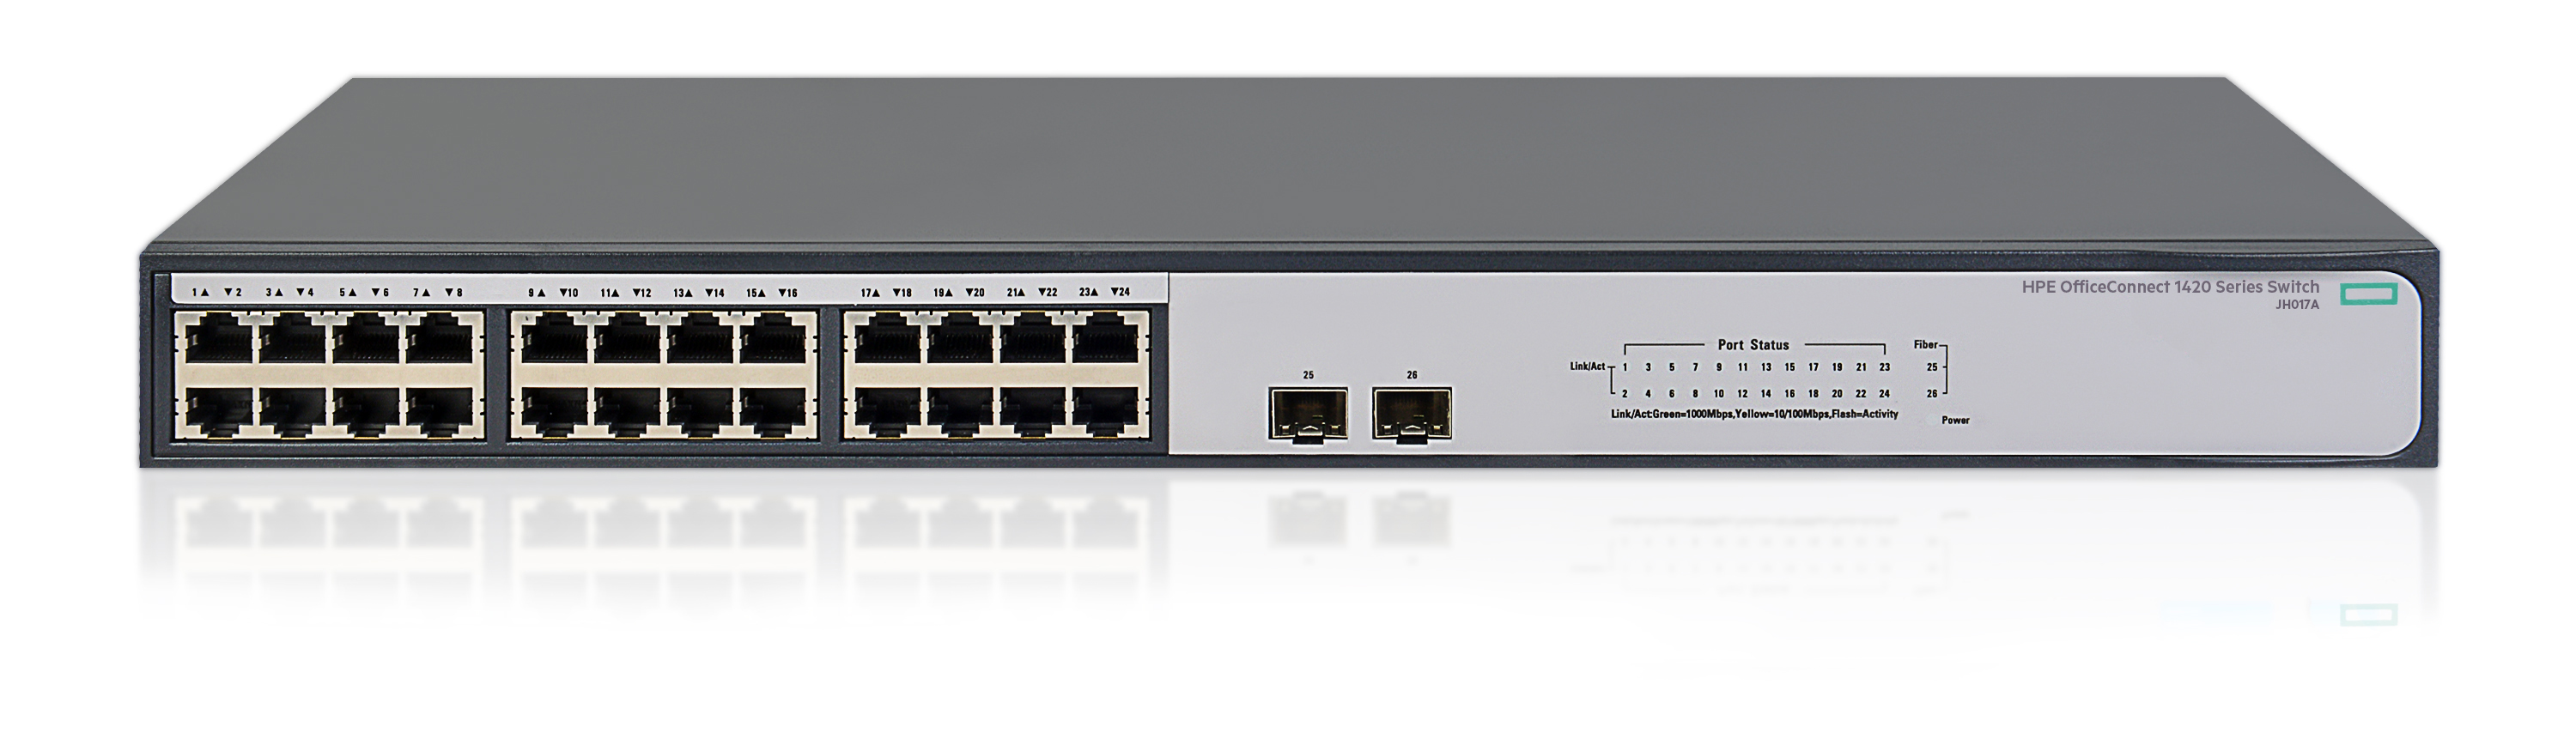 HPE OfficeConnect 1420 24G 2SFP スイッチ